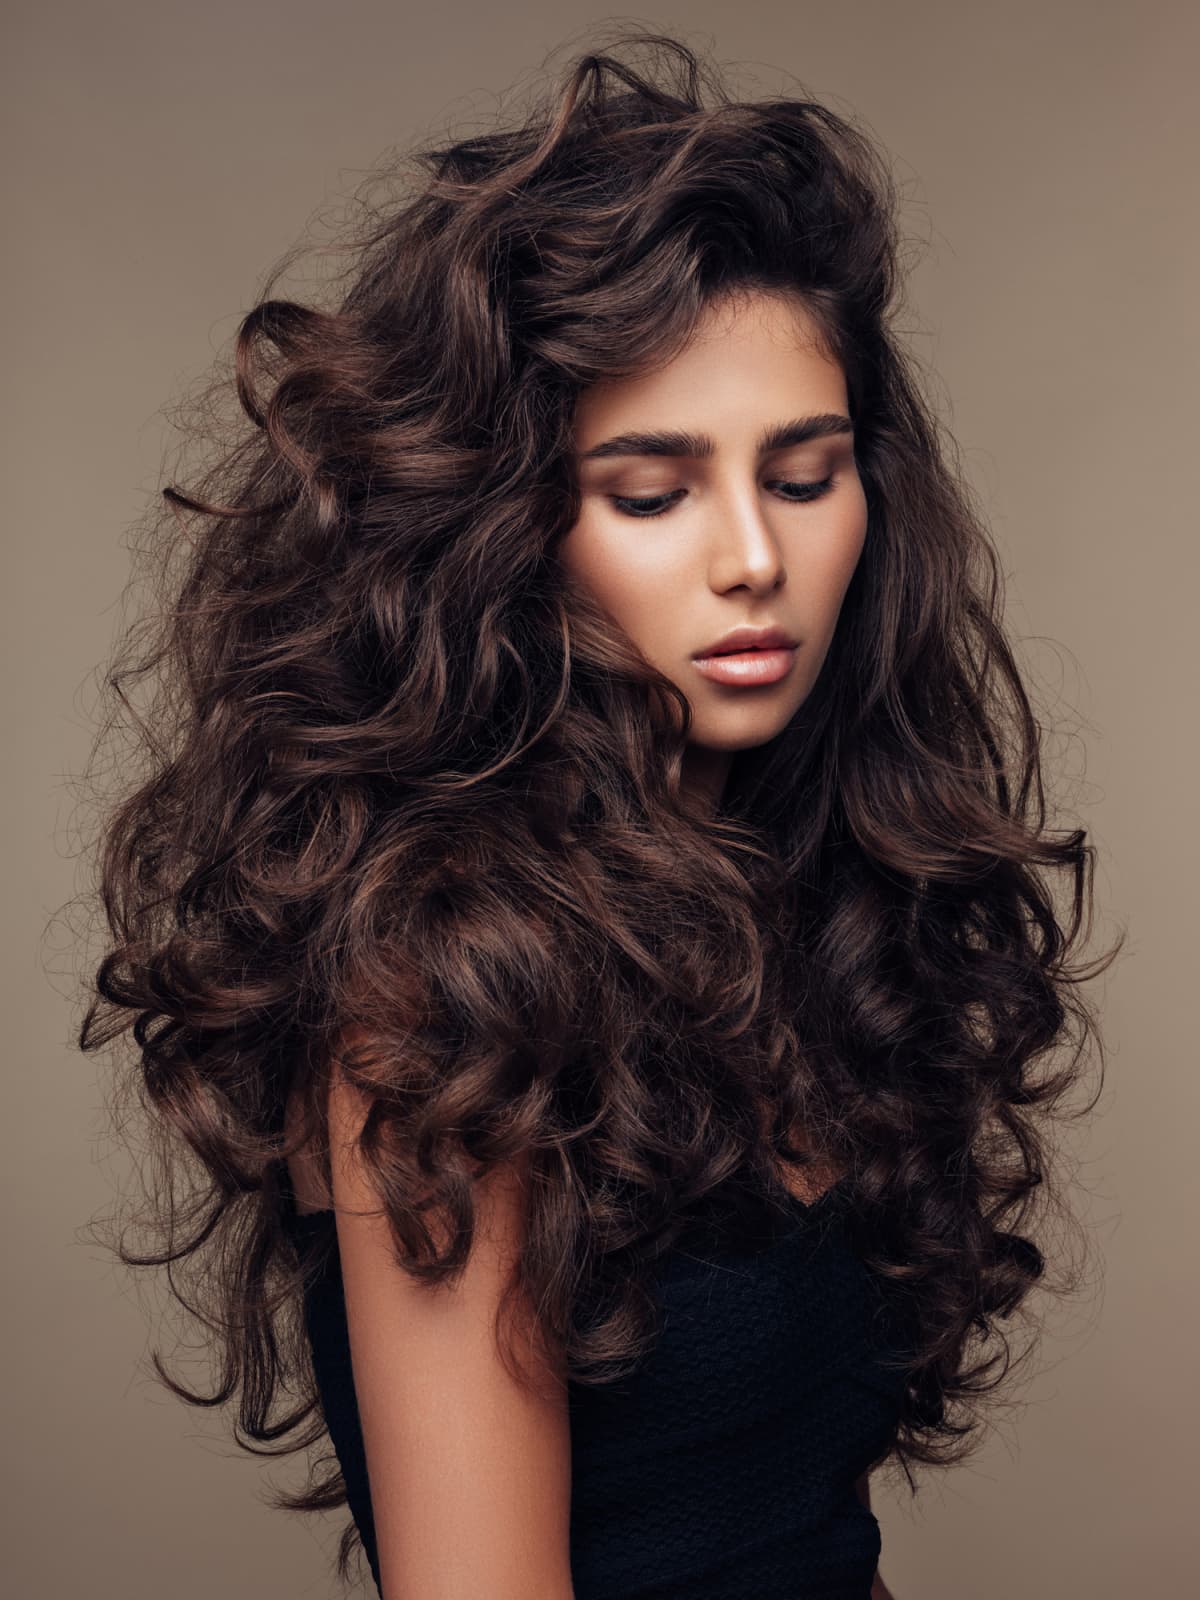 A woman with wavy hair.